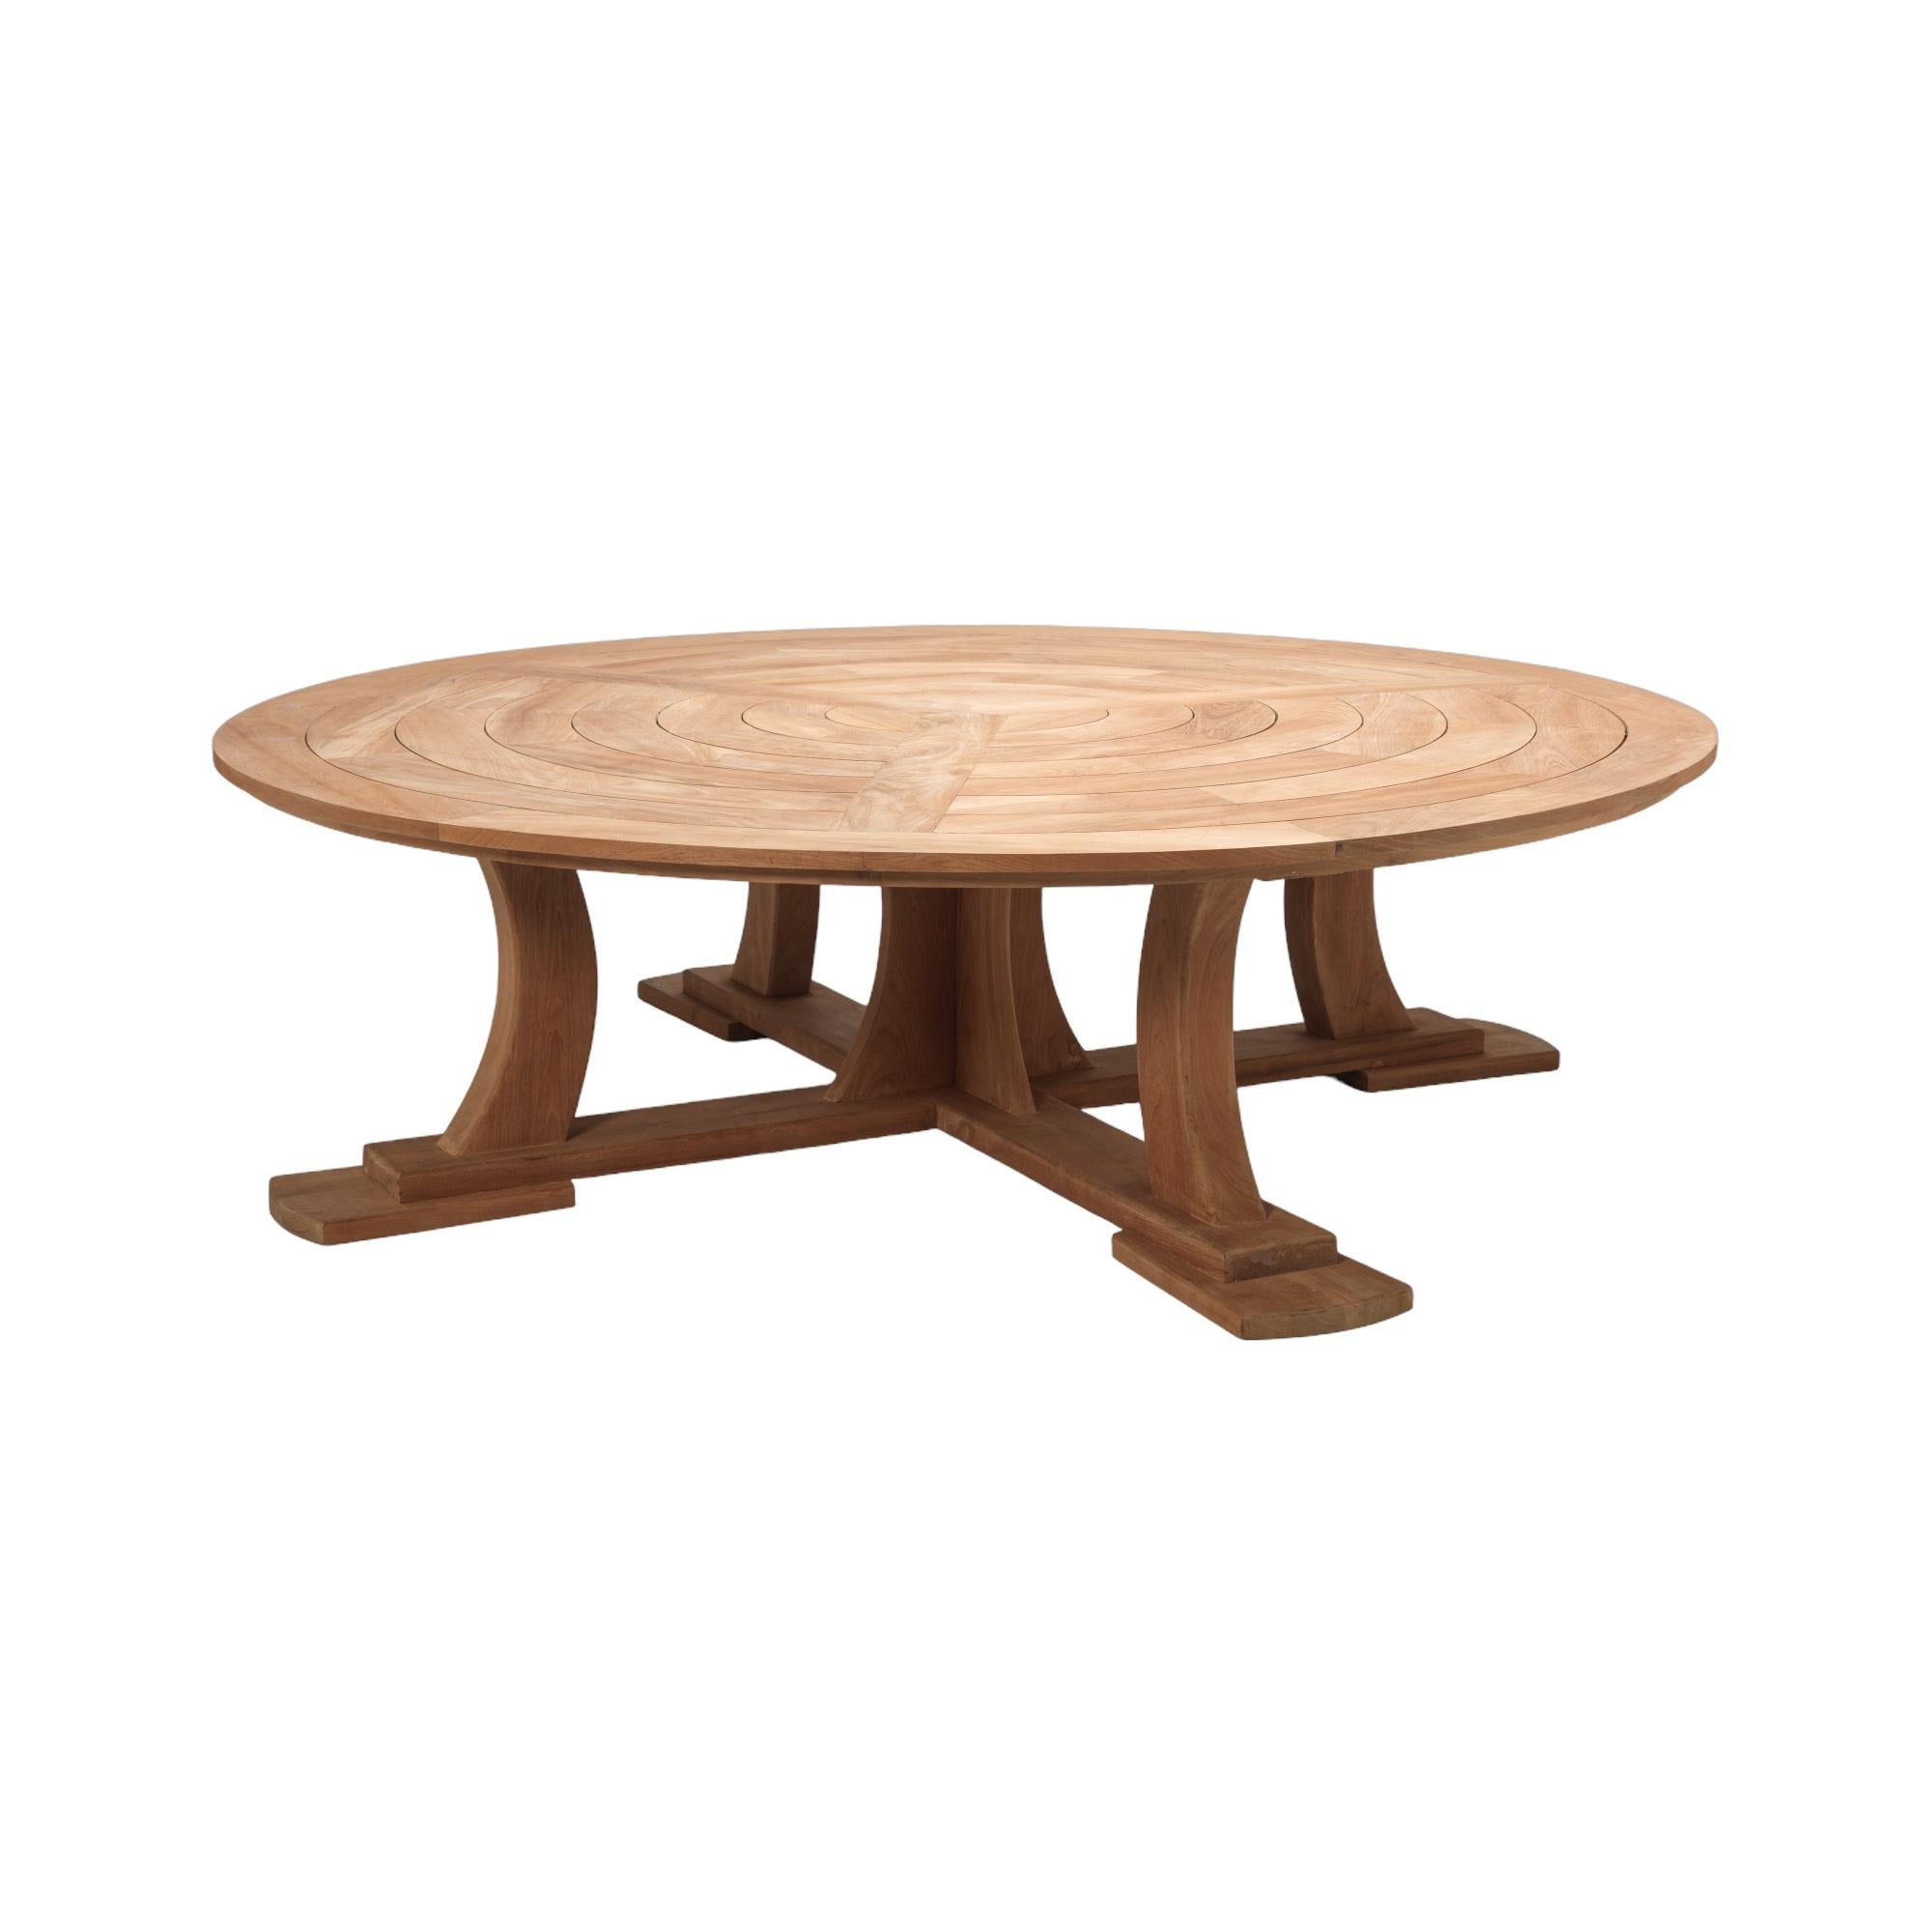 A fine country house circular teak garden table with six accompanying curved wood benches. The table seats 12 comfortably. The geometric design planked top above swept legs and quadriform platform base.